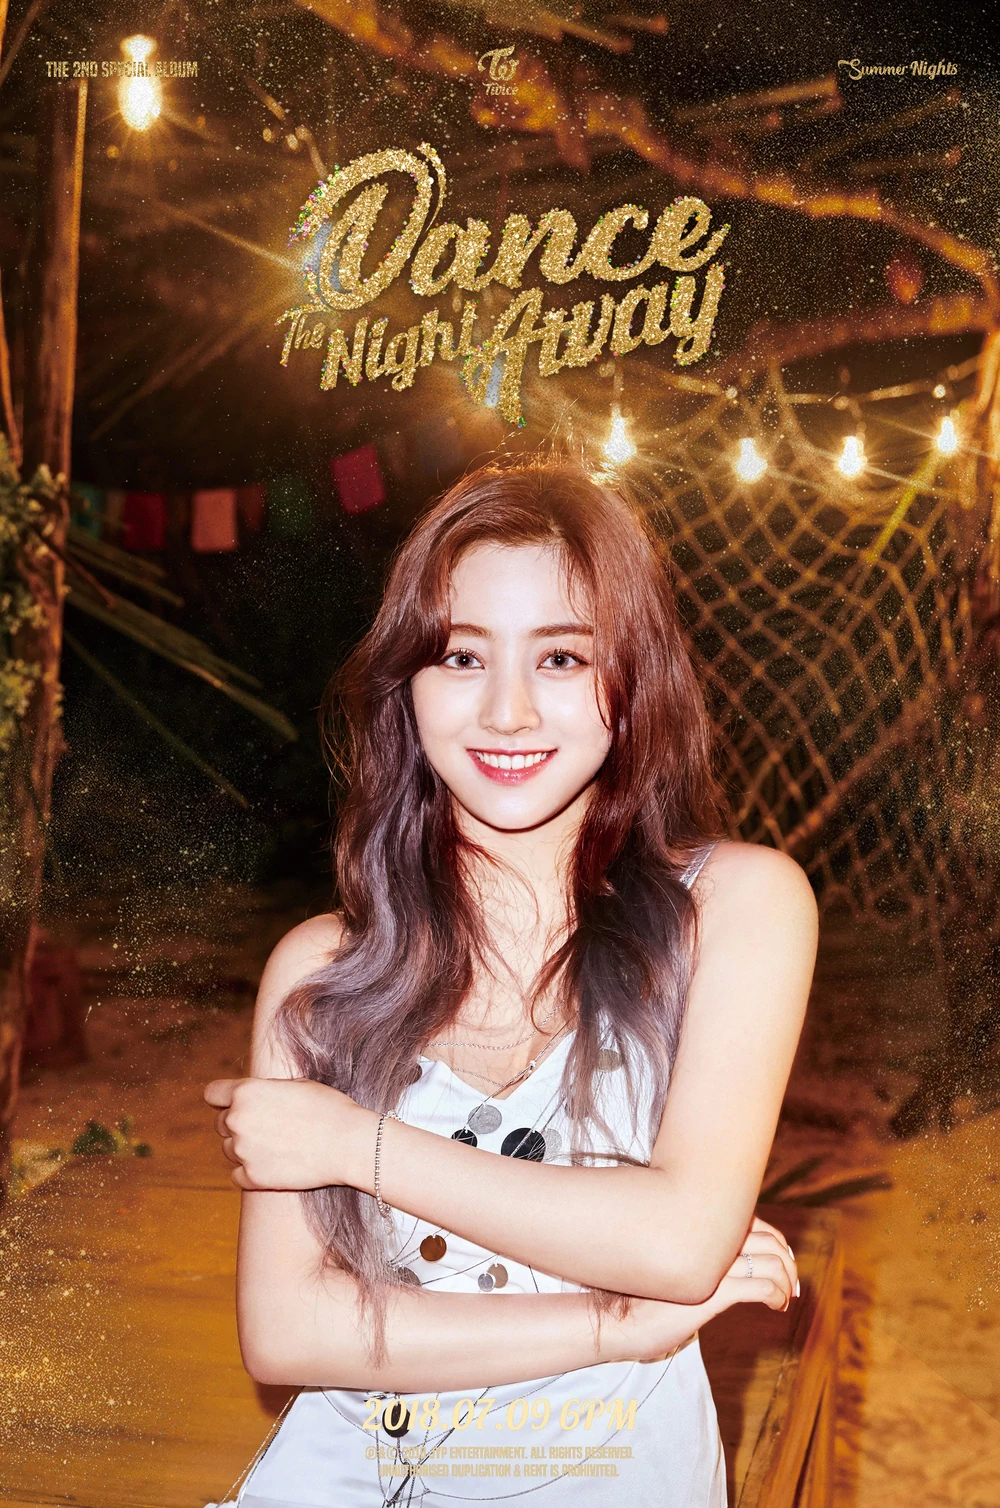 Twice Summer Nights Jihyo Concept Teaser Picture Image Photo Kpop K-Concept 1